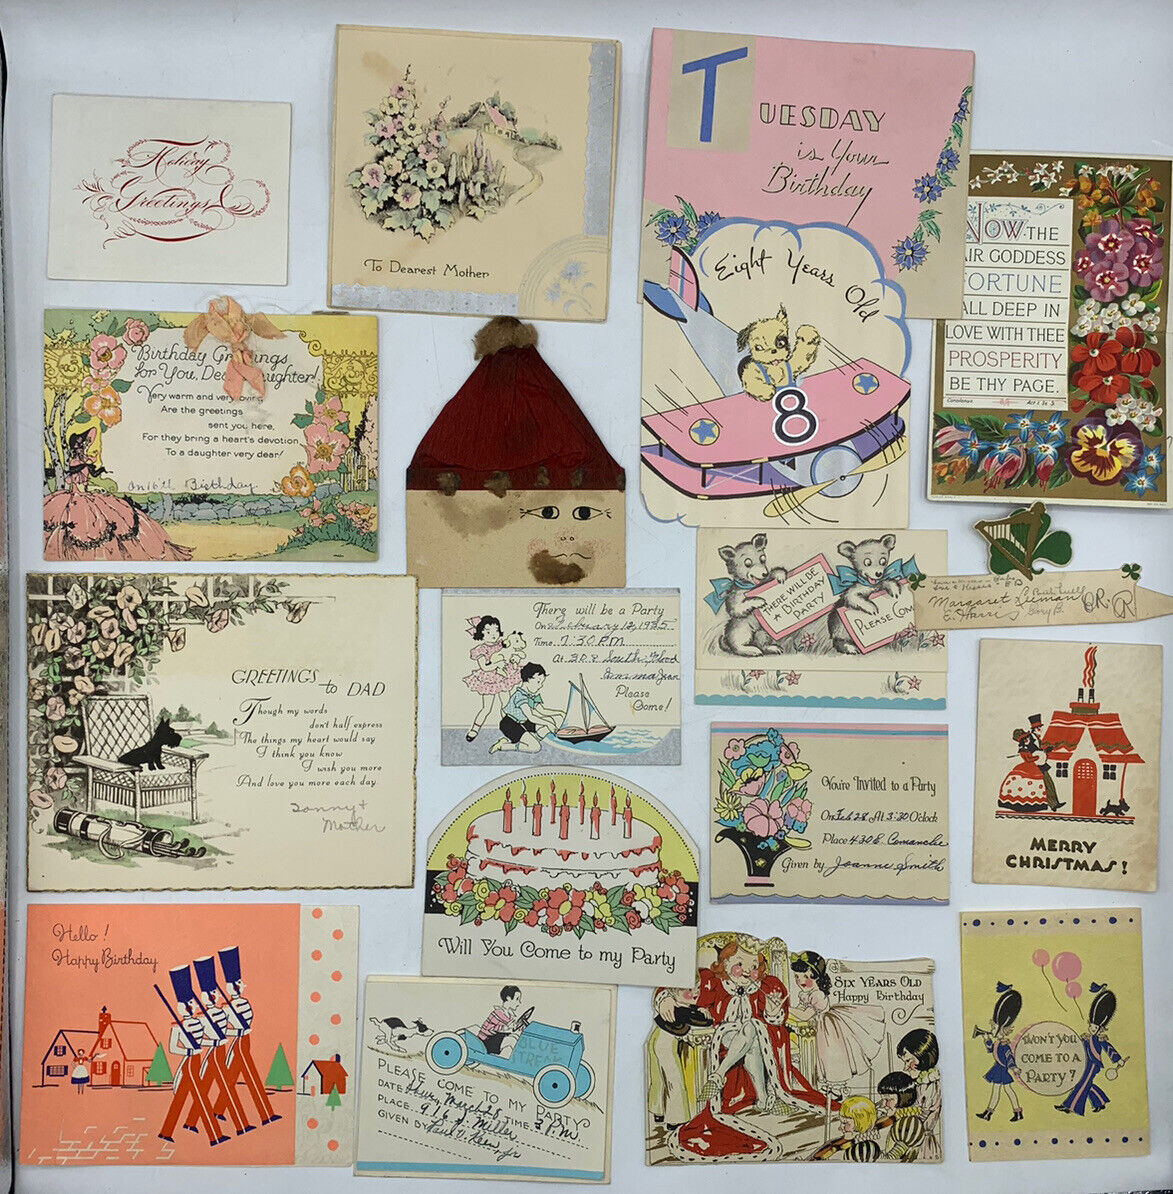 18 Vintage Greeting Card Invitation Lot Die Cut 1920s Christmas Birthday Party